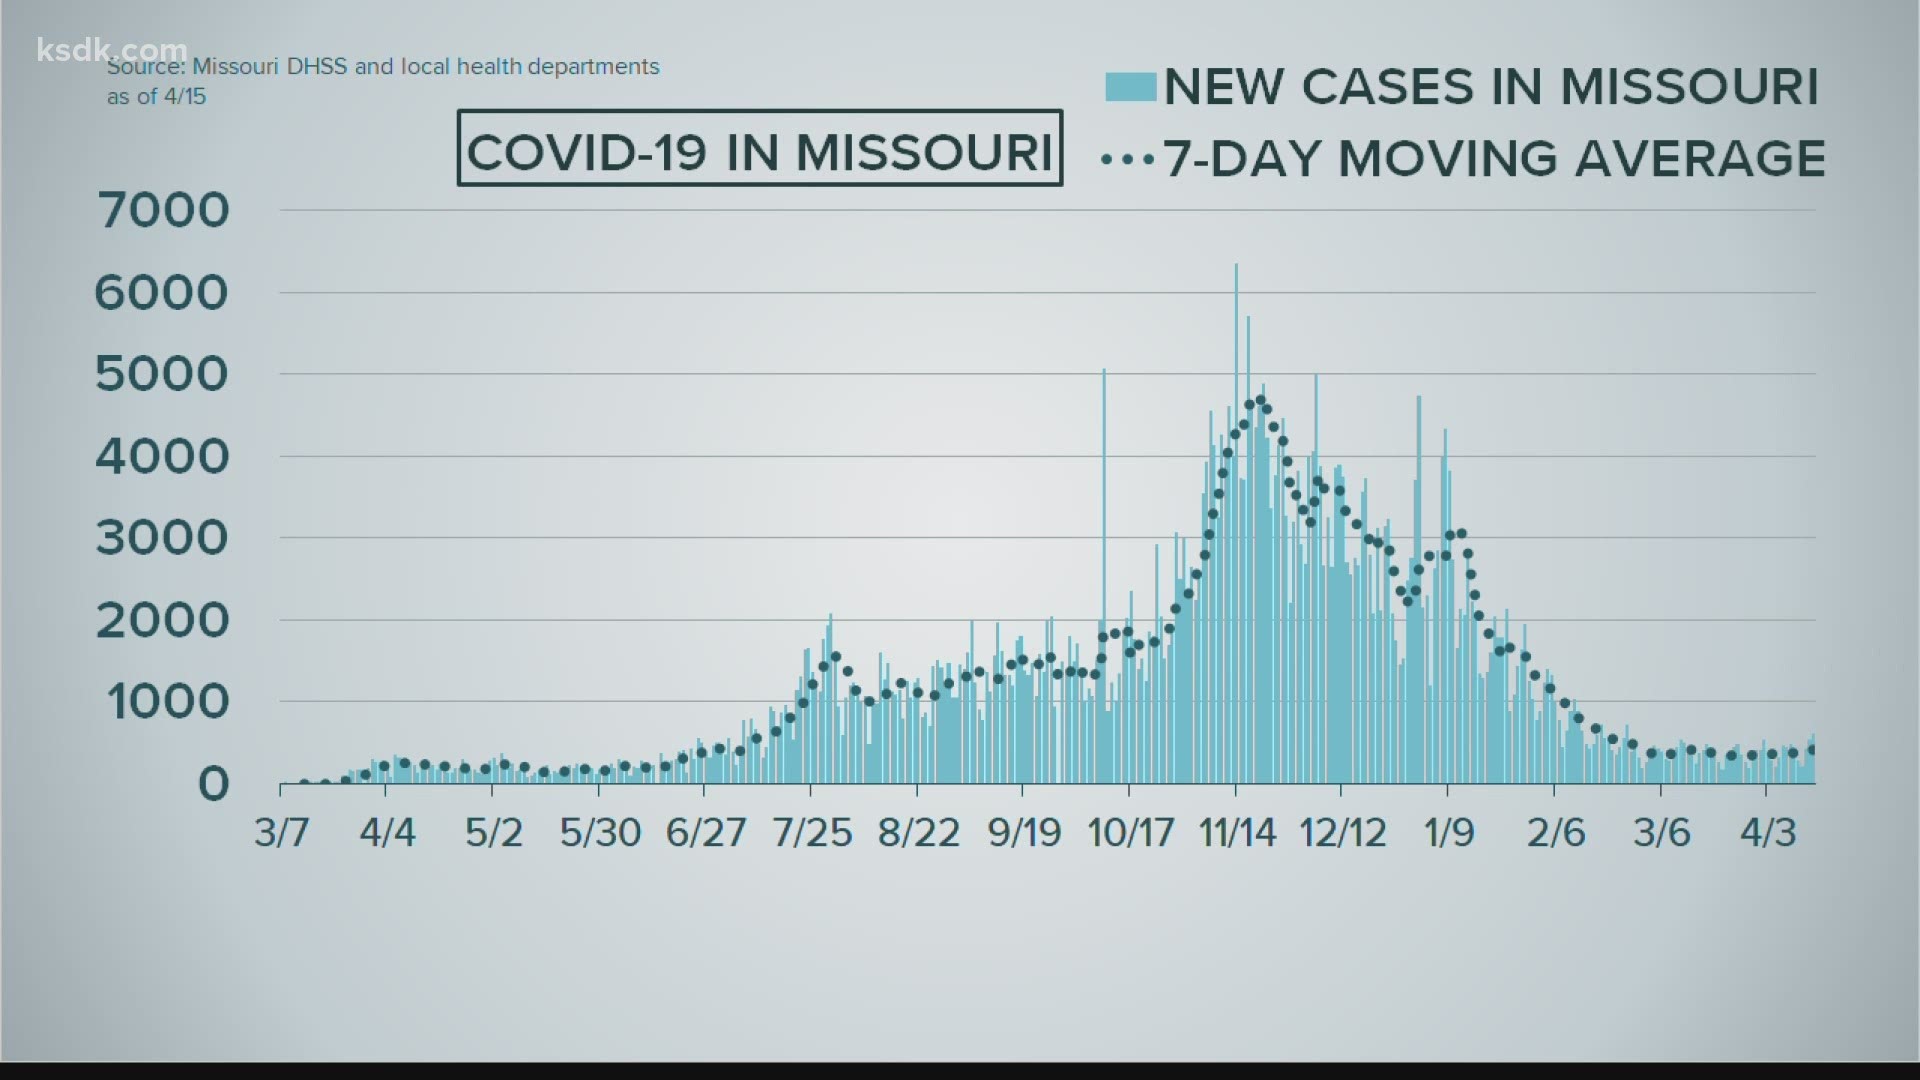 New cases on the rise in Missouri and Illinois